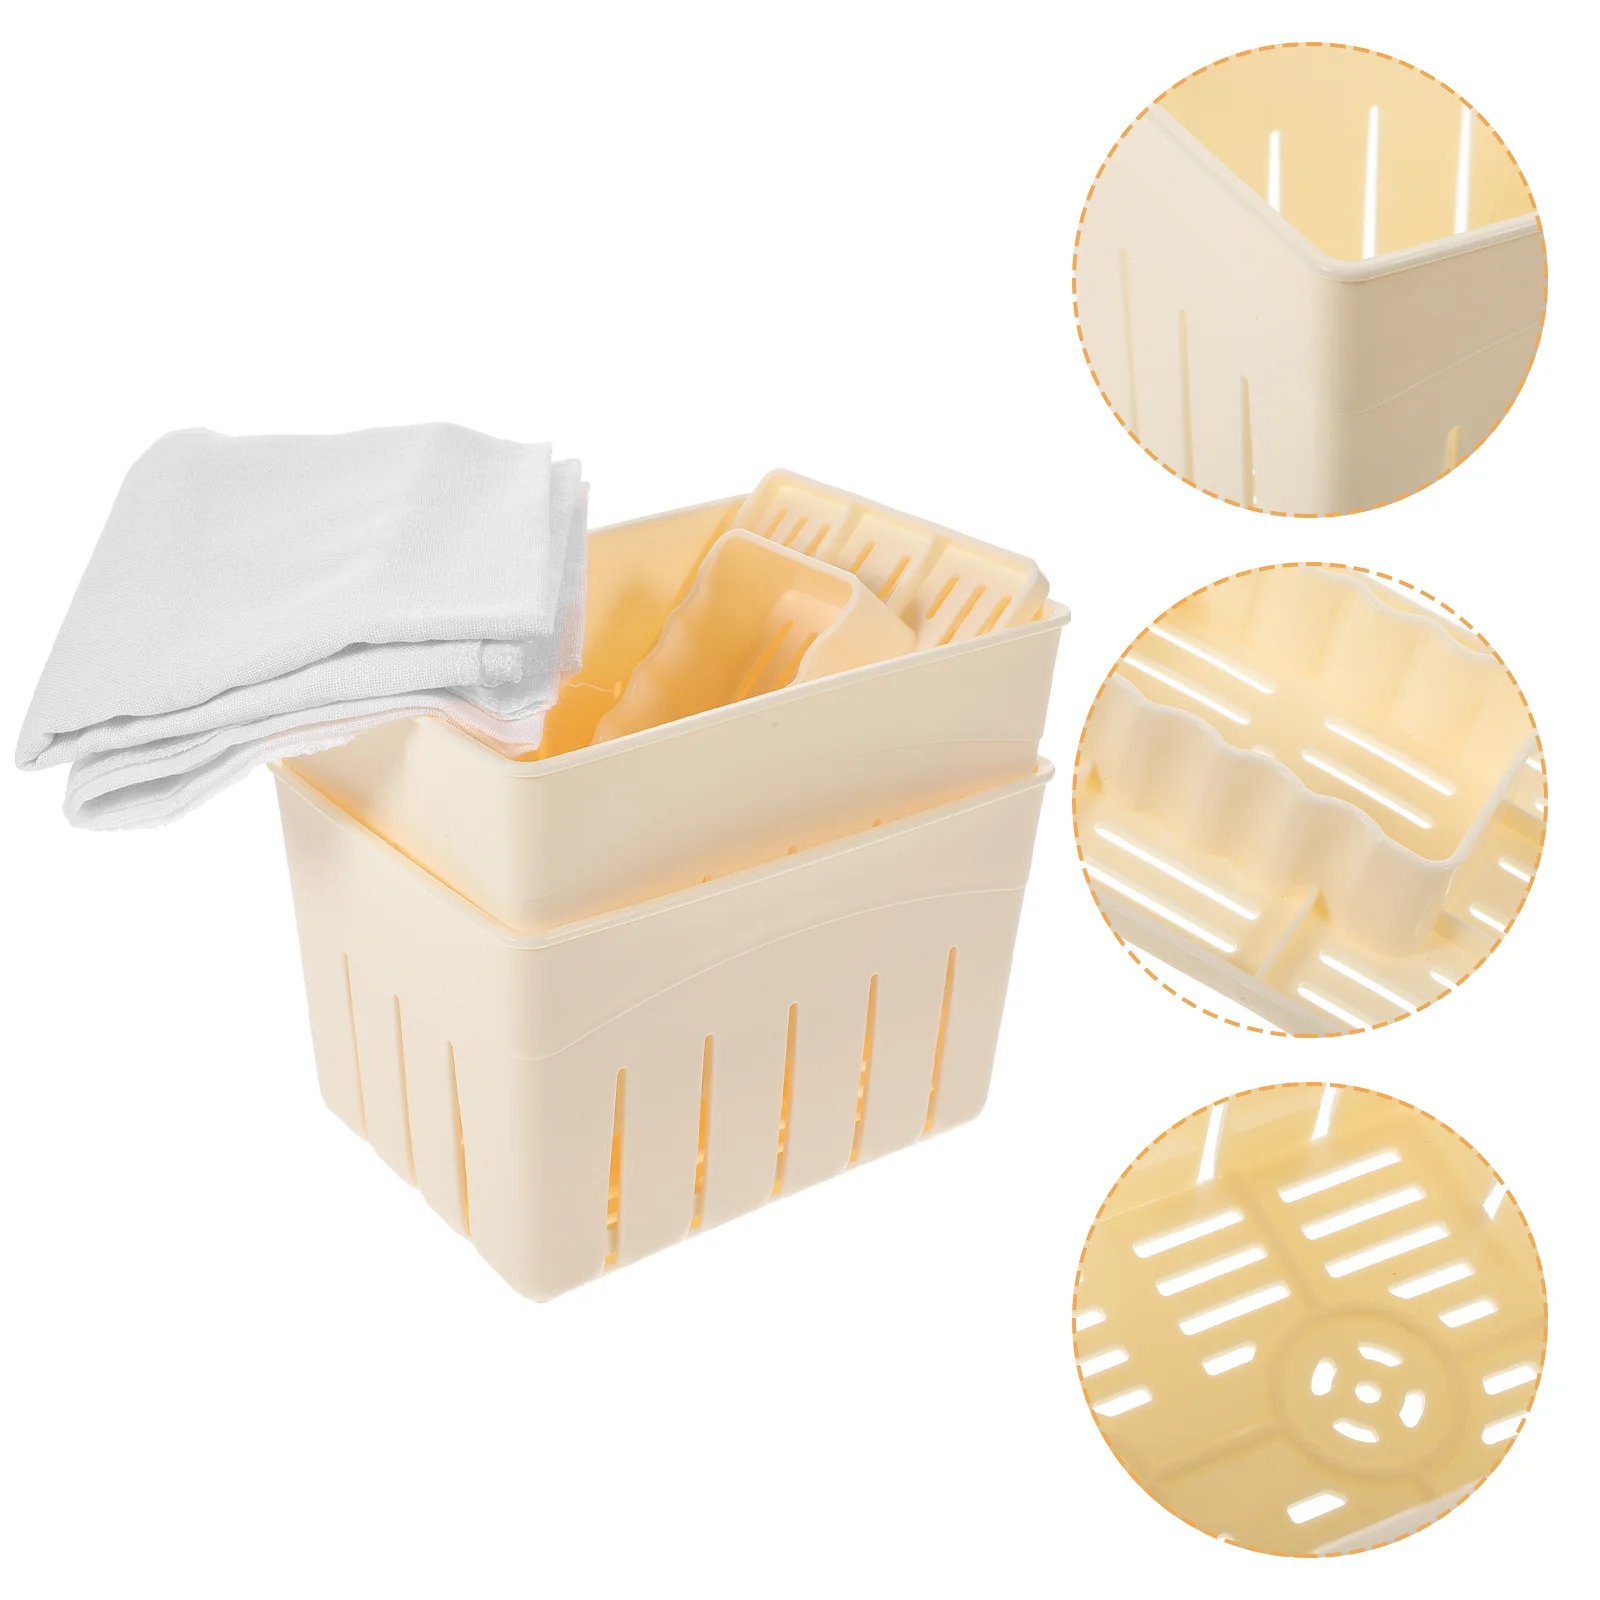 

Plastic Tofu Press Mould Homemade Tofu Mold Soybean Curd Tofu Making Mold With Cheese Cloth Kitchen Cooking Tool